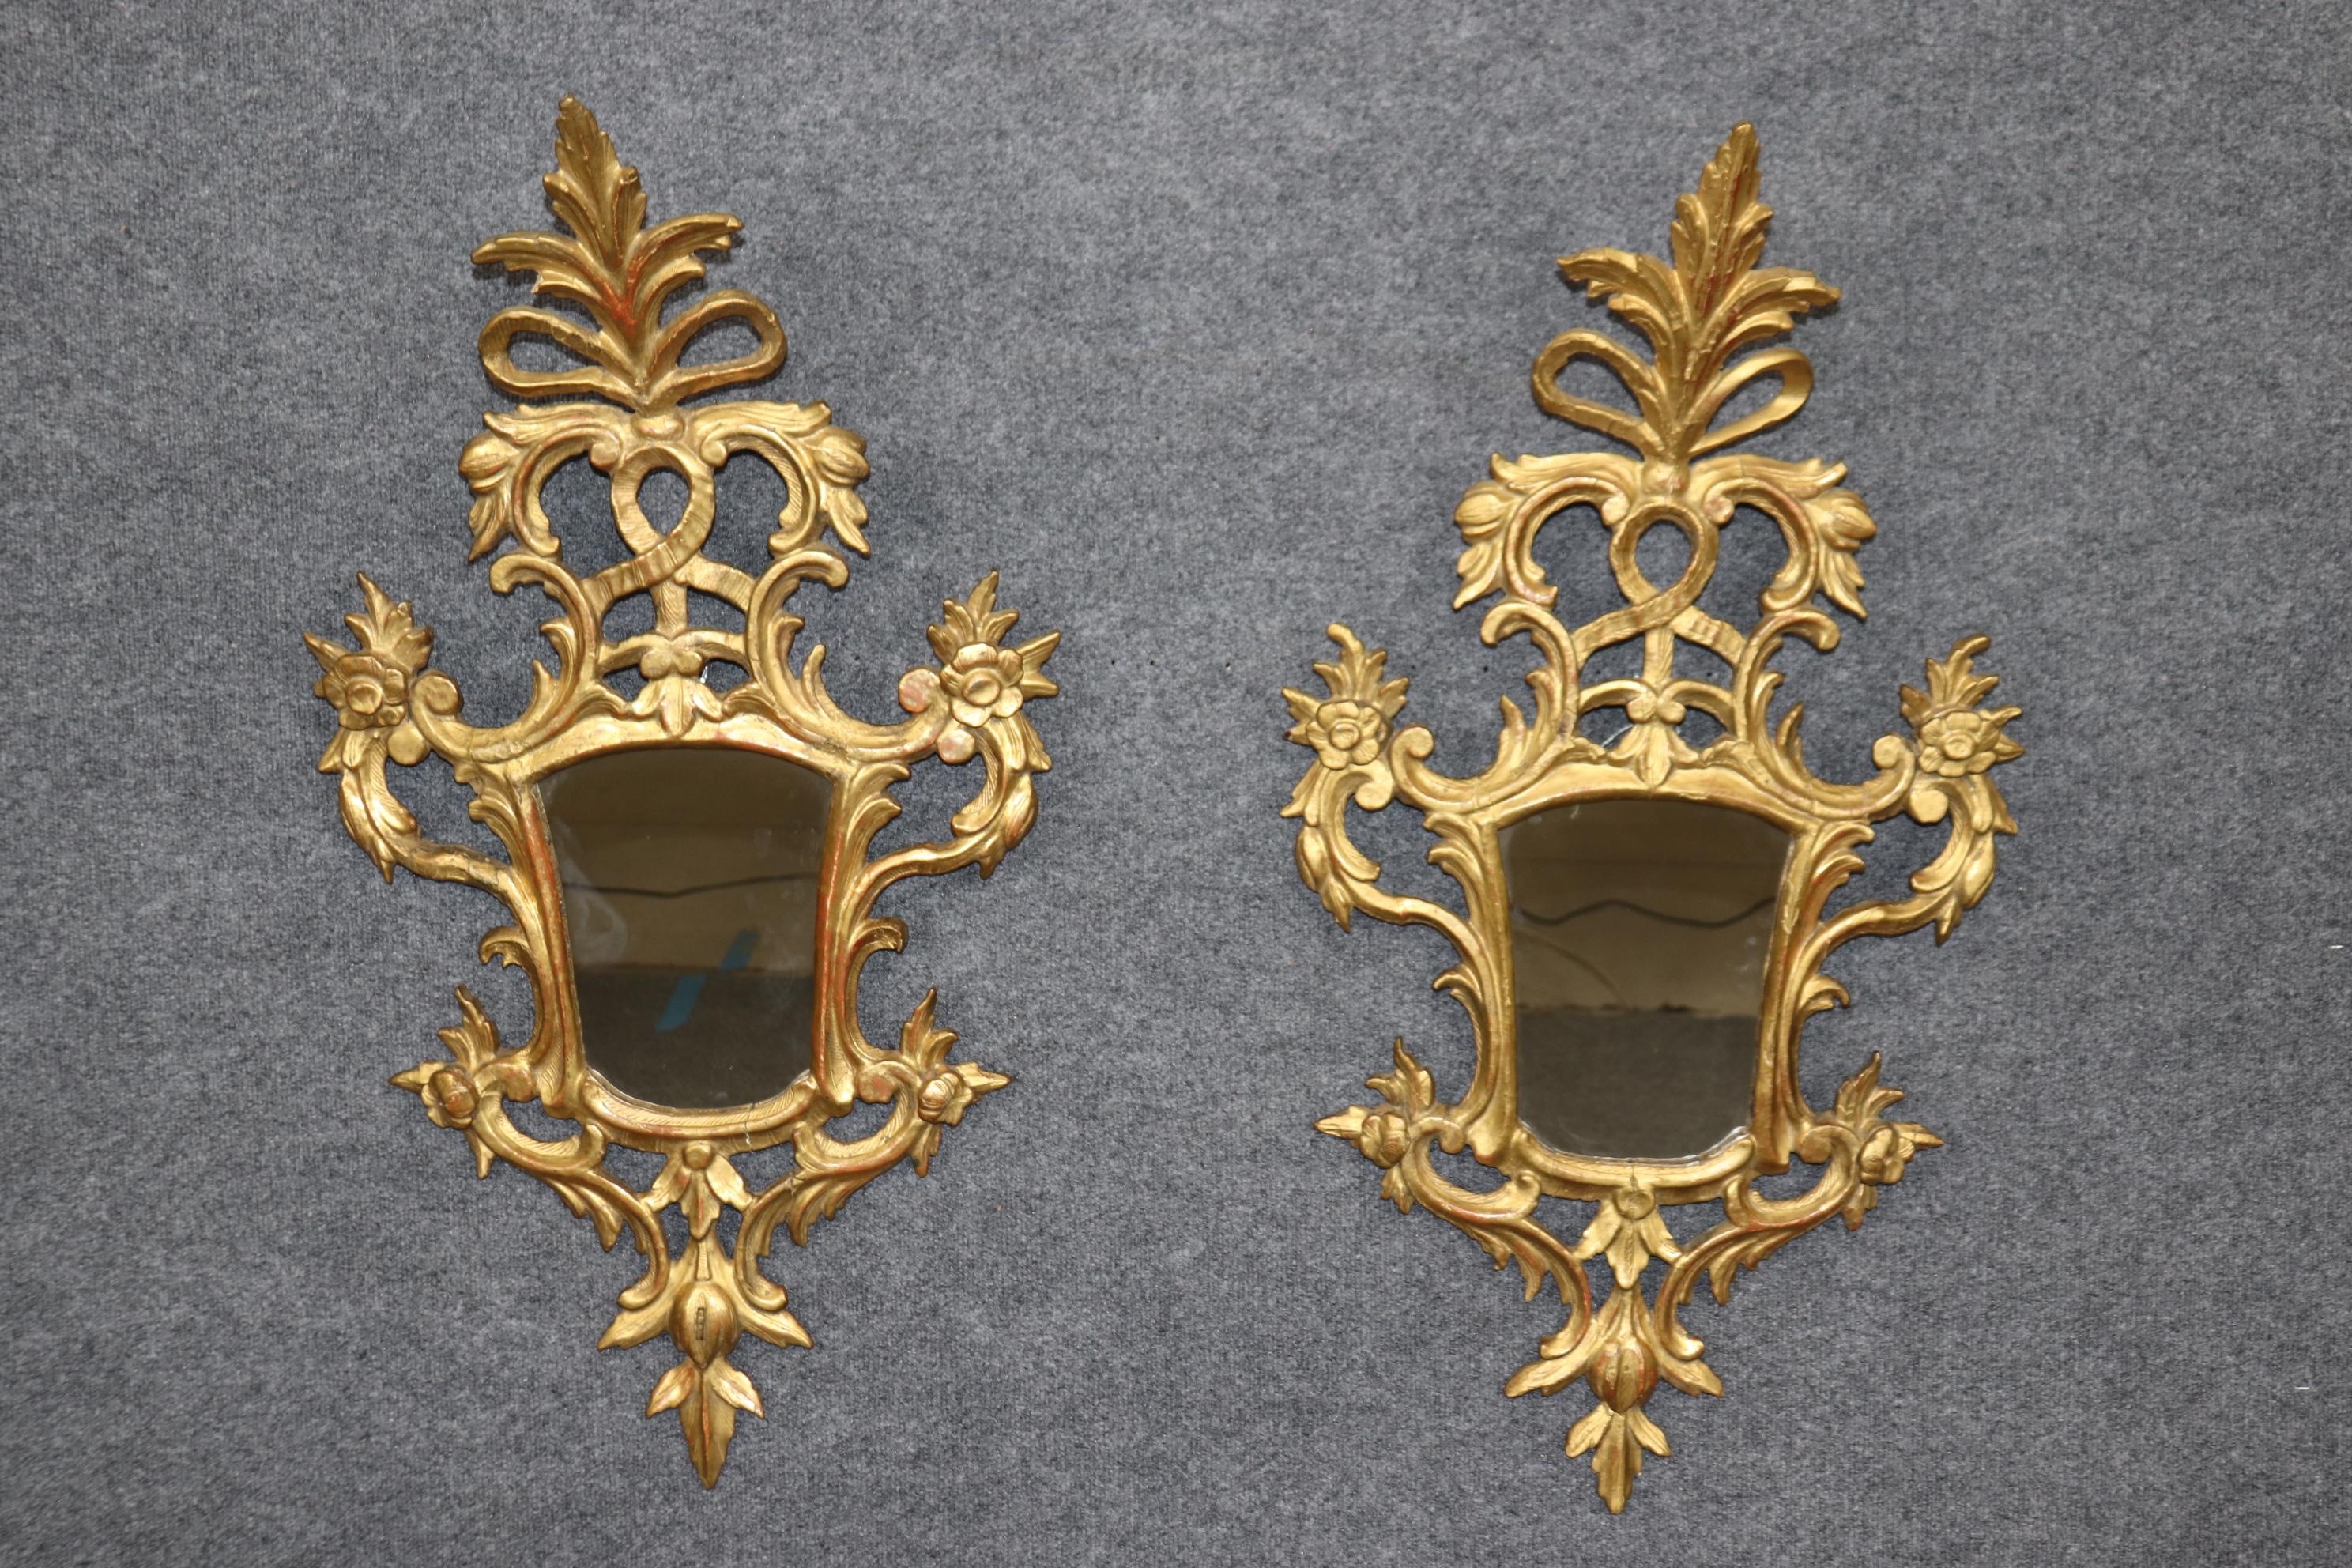 These gorgeous little gems are from the 1820-1840s era and Italian, possibly Florence. The mirros are gracefully carved of beech wood and covered in a genuine 23 kt water gilt finish over Italian red bole clay ground. They do have signs of age such